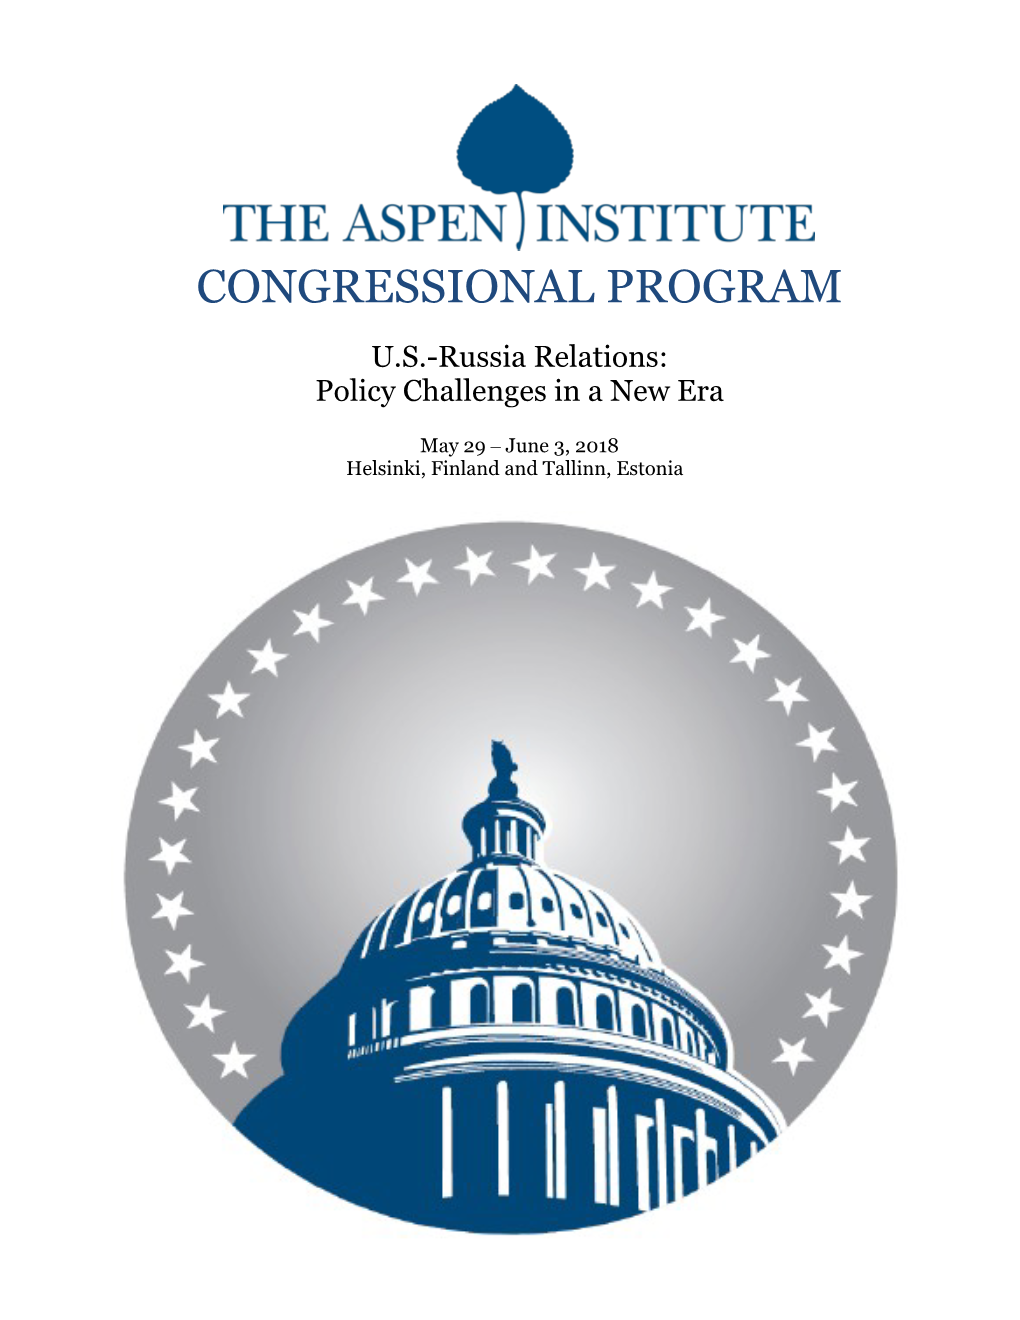 CONGRESSIONAL PROGRAM U.S.-Russia Relations: Policy Challenges in a New Era